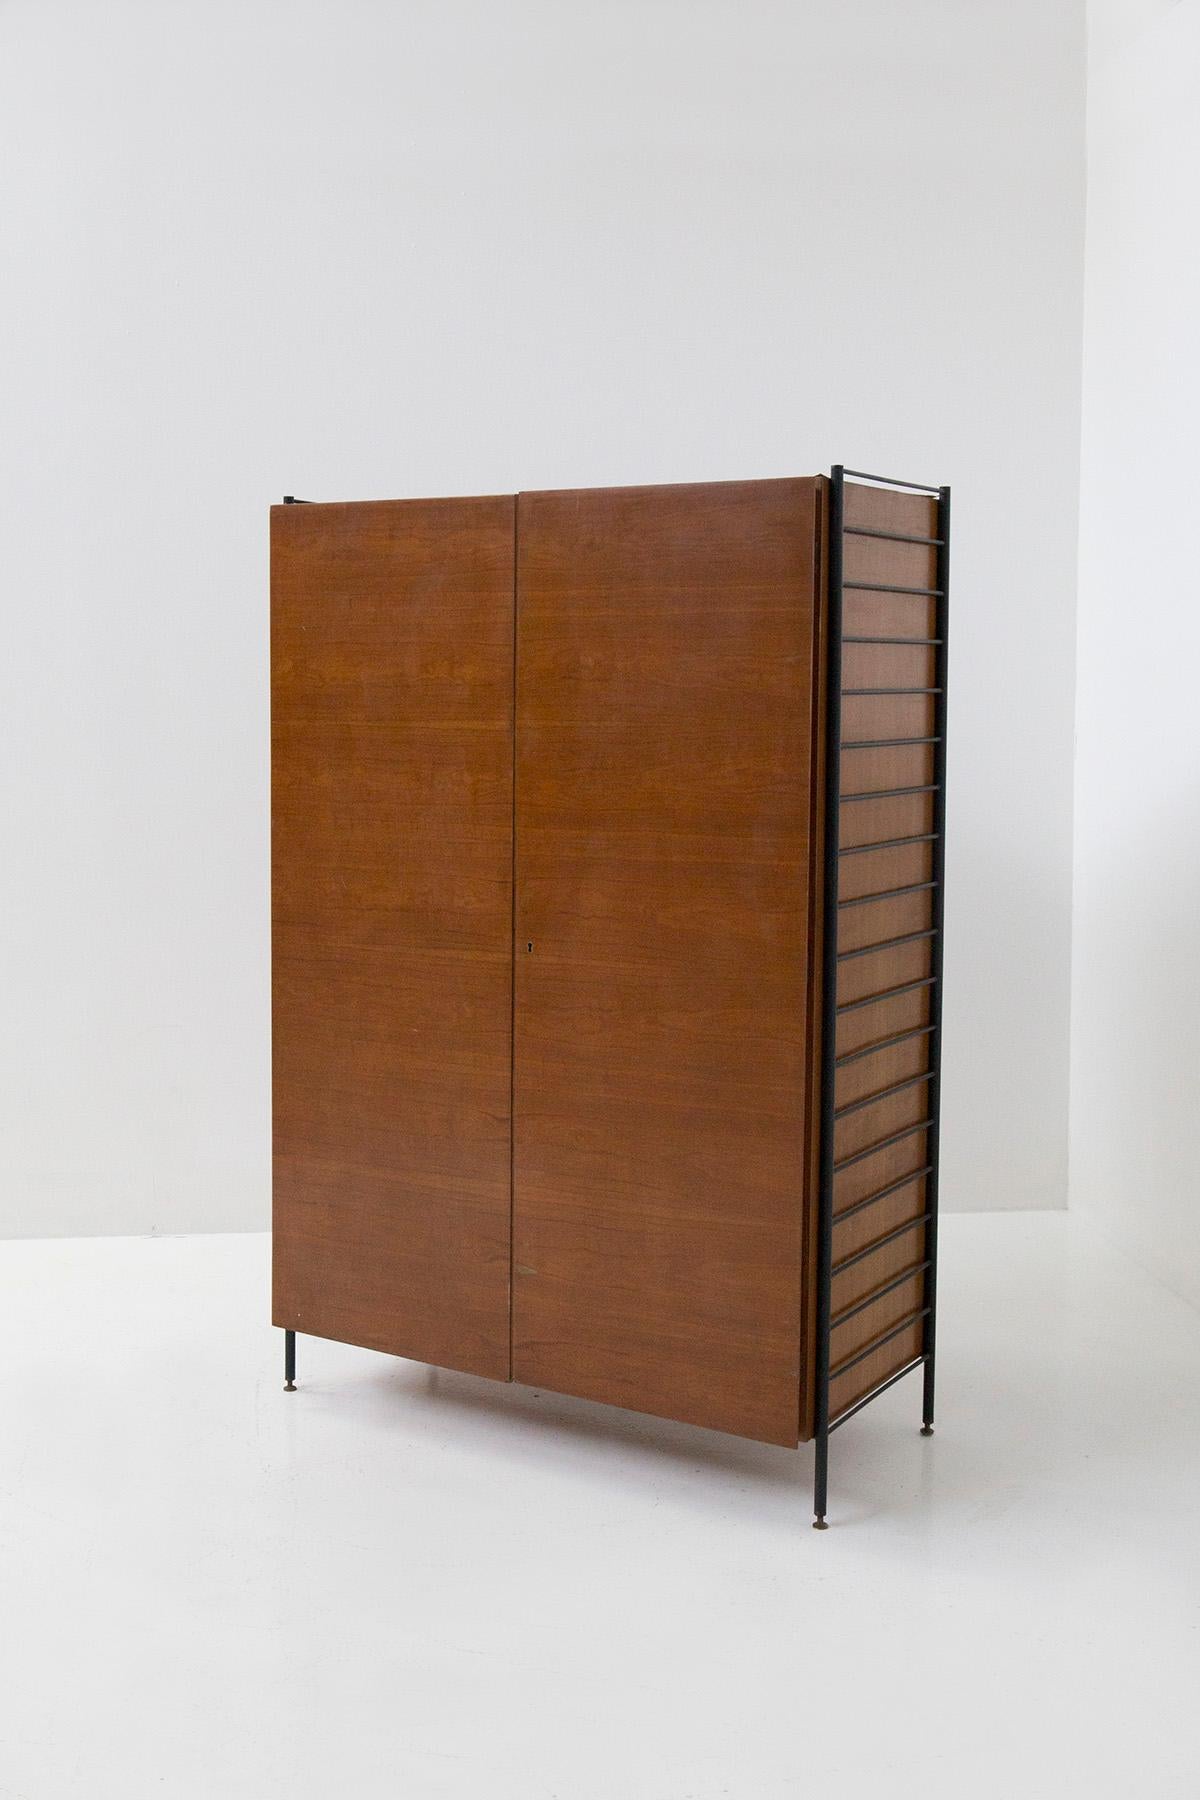 Small Italian bedroom wardrobe in wood and iron from the 1950s. The small wardrobe is made of wood with two hinged doors. On the sides of the wardrobe we find two iron ladders anchored to it, which serve as decoration but also as clothes and